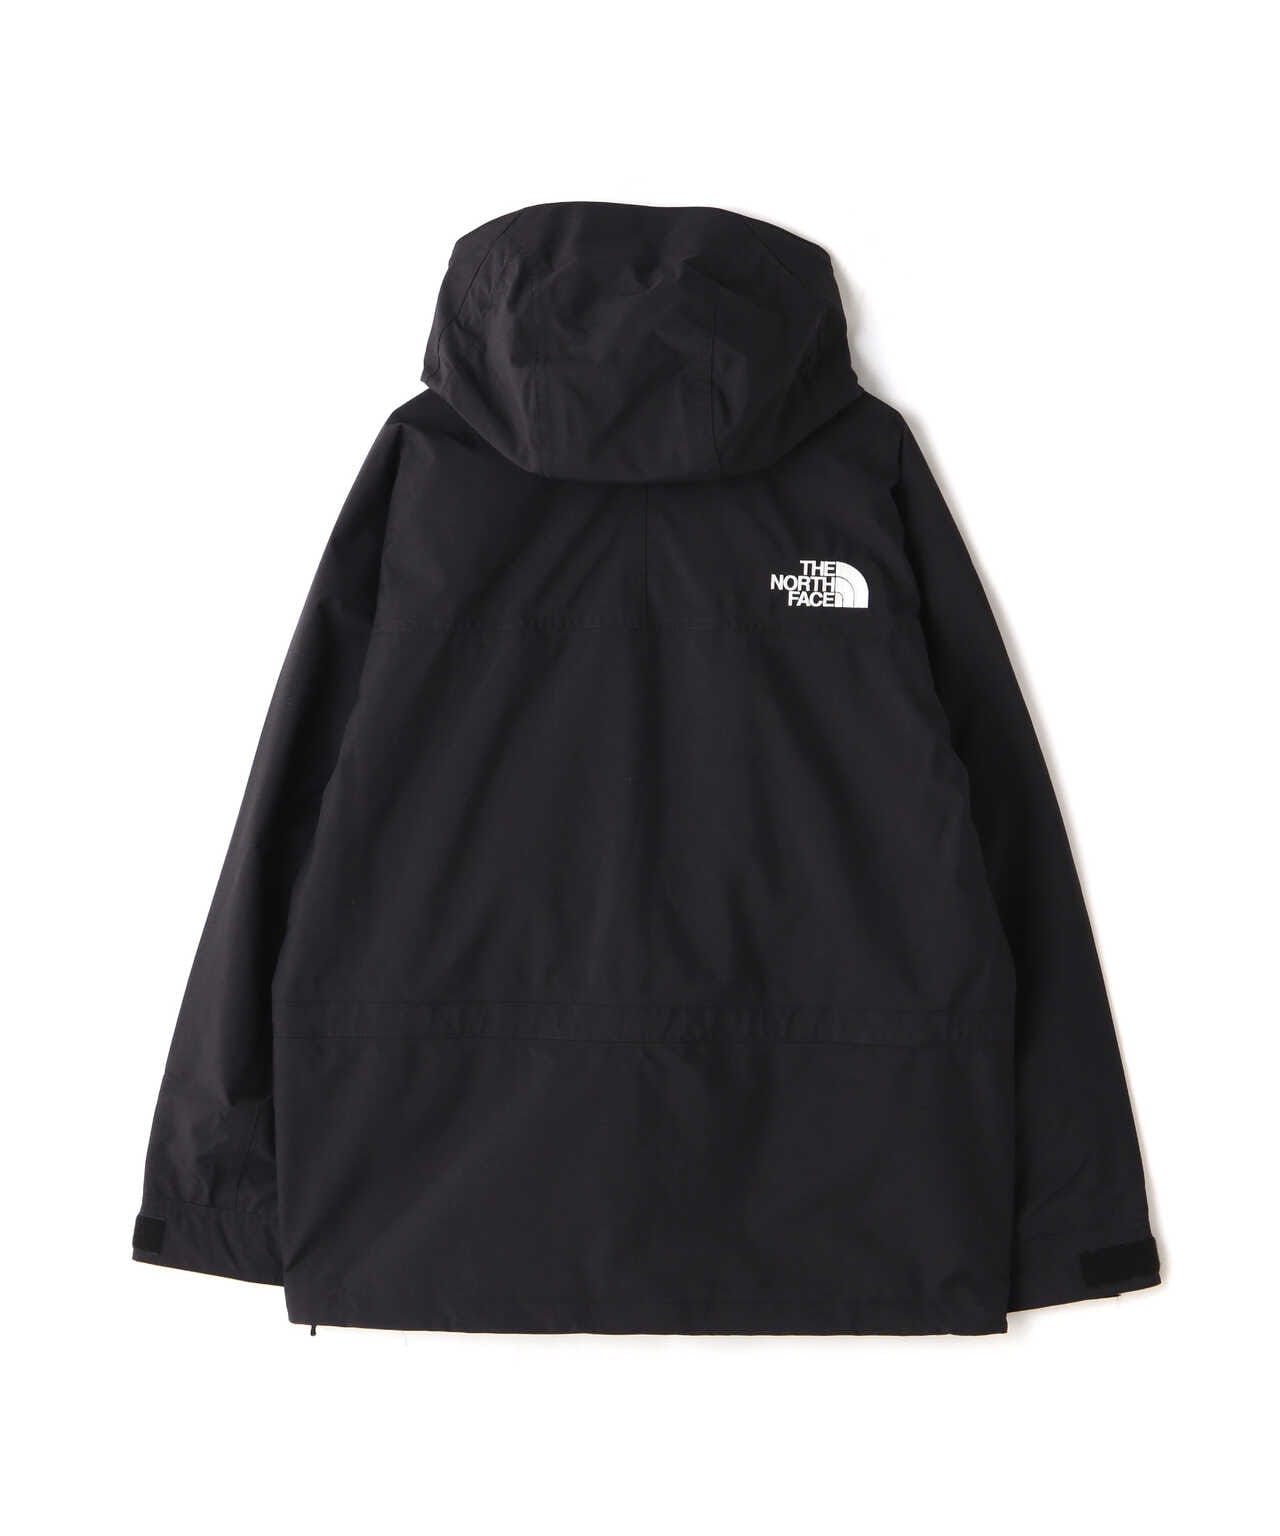 NP11834The North Face Mountain Light Jacket 新品